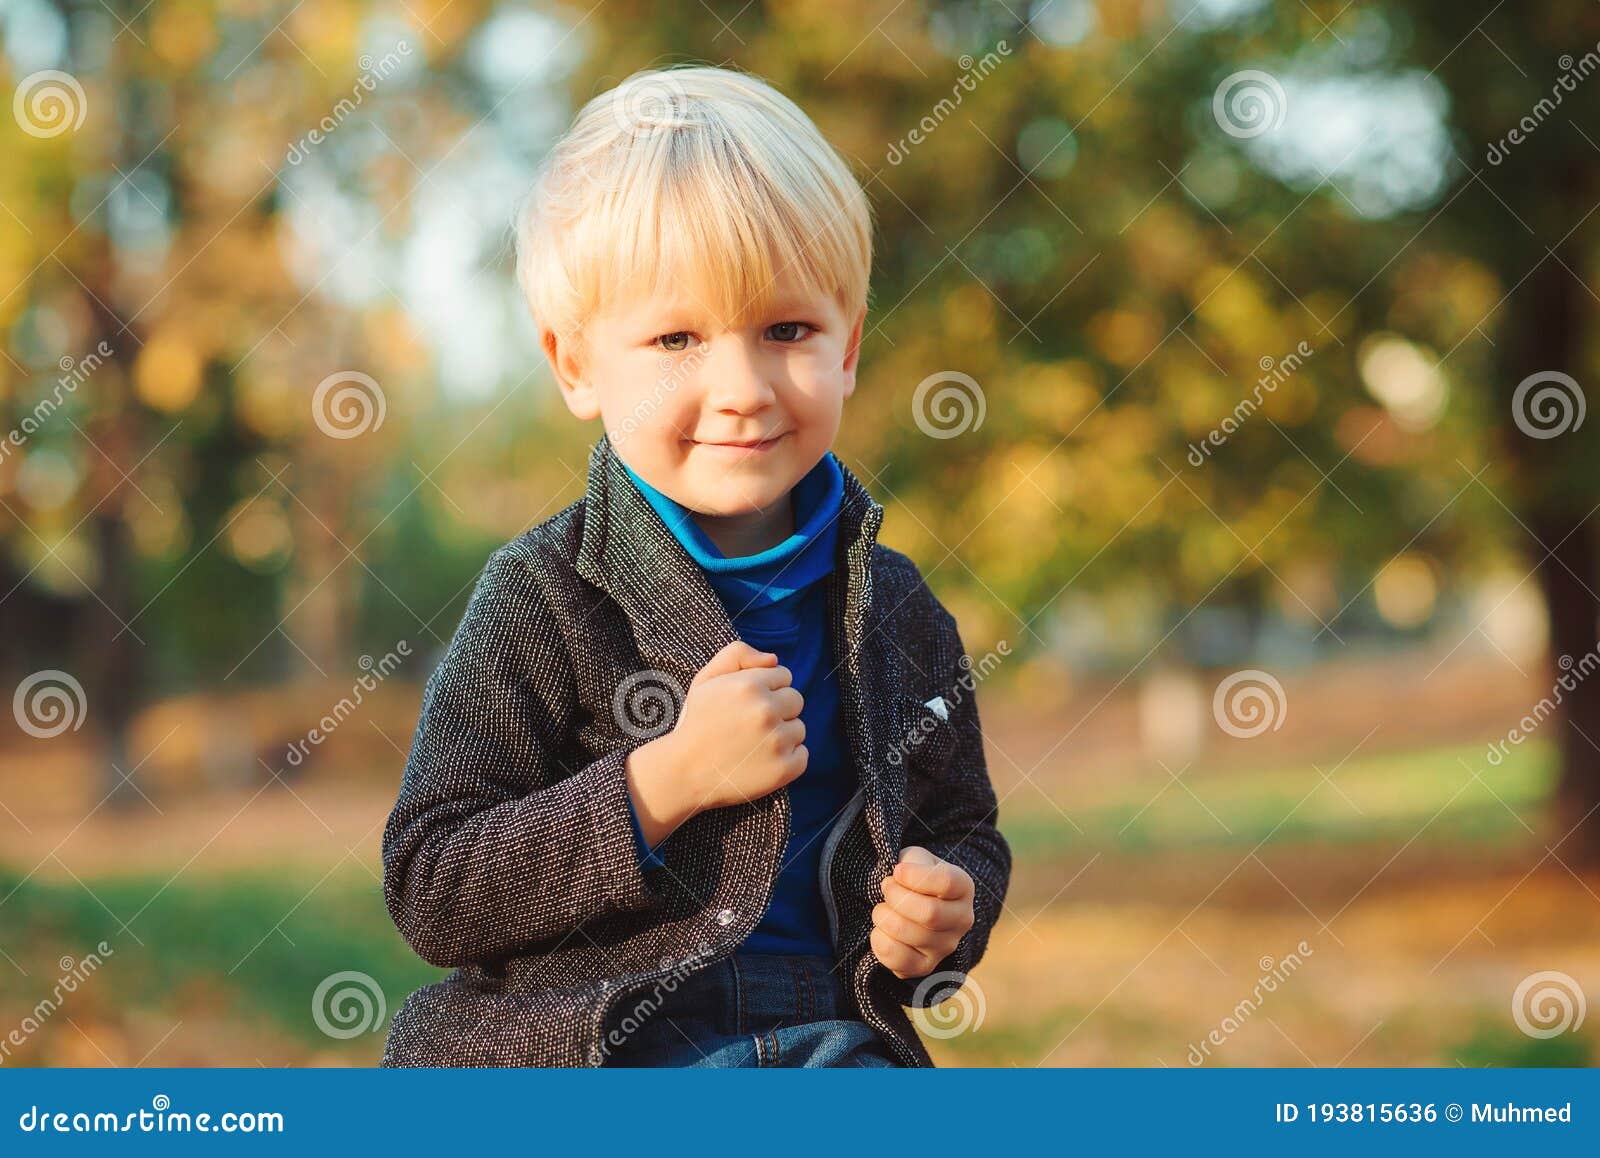 Stylish Happy Child on Autumn Nature. Handsome Boy with Modern Hairstyle  Stock Photo - Image of october, handsome: 193815636